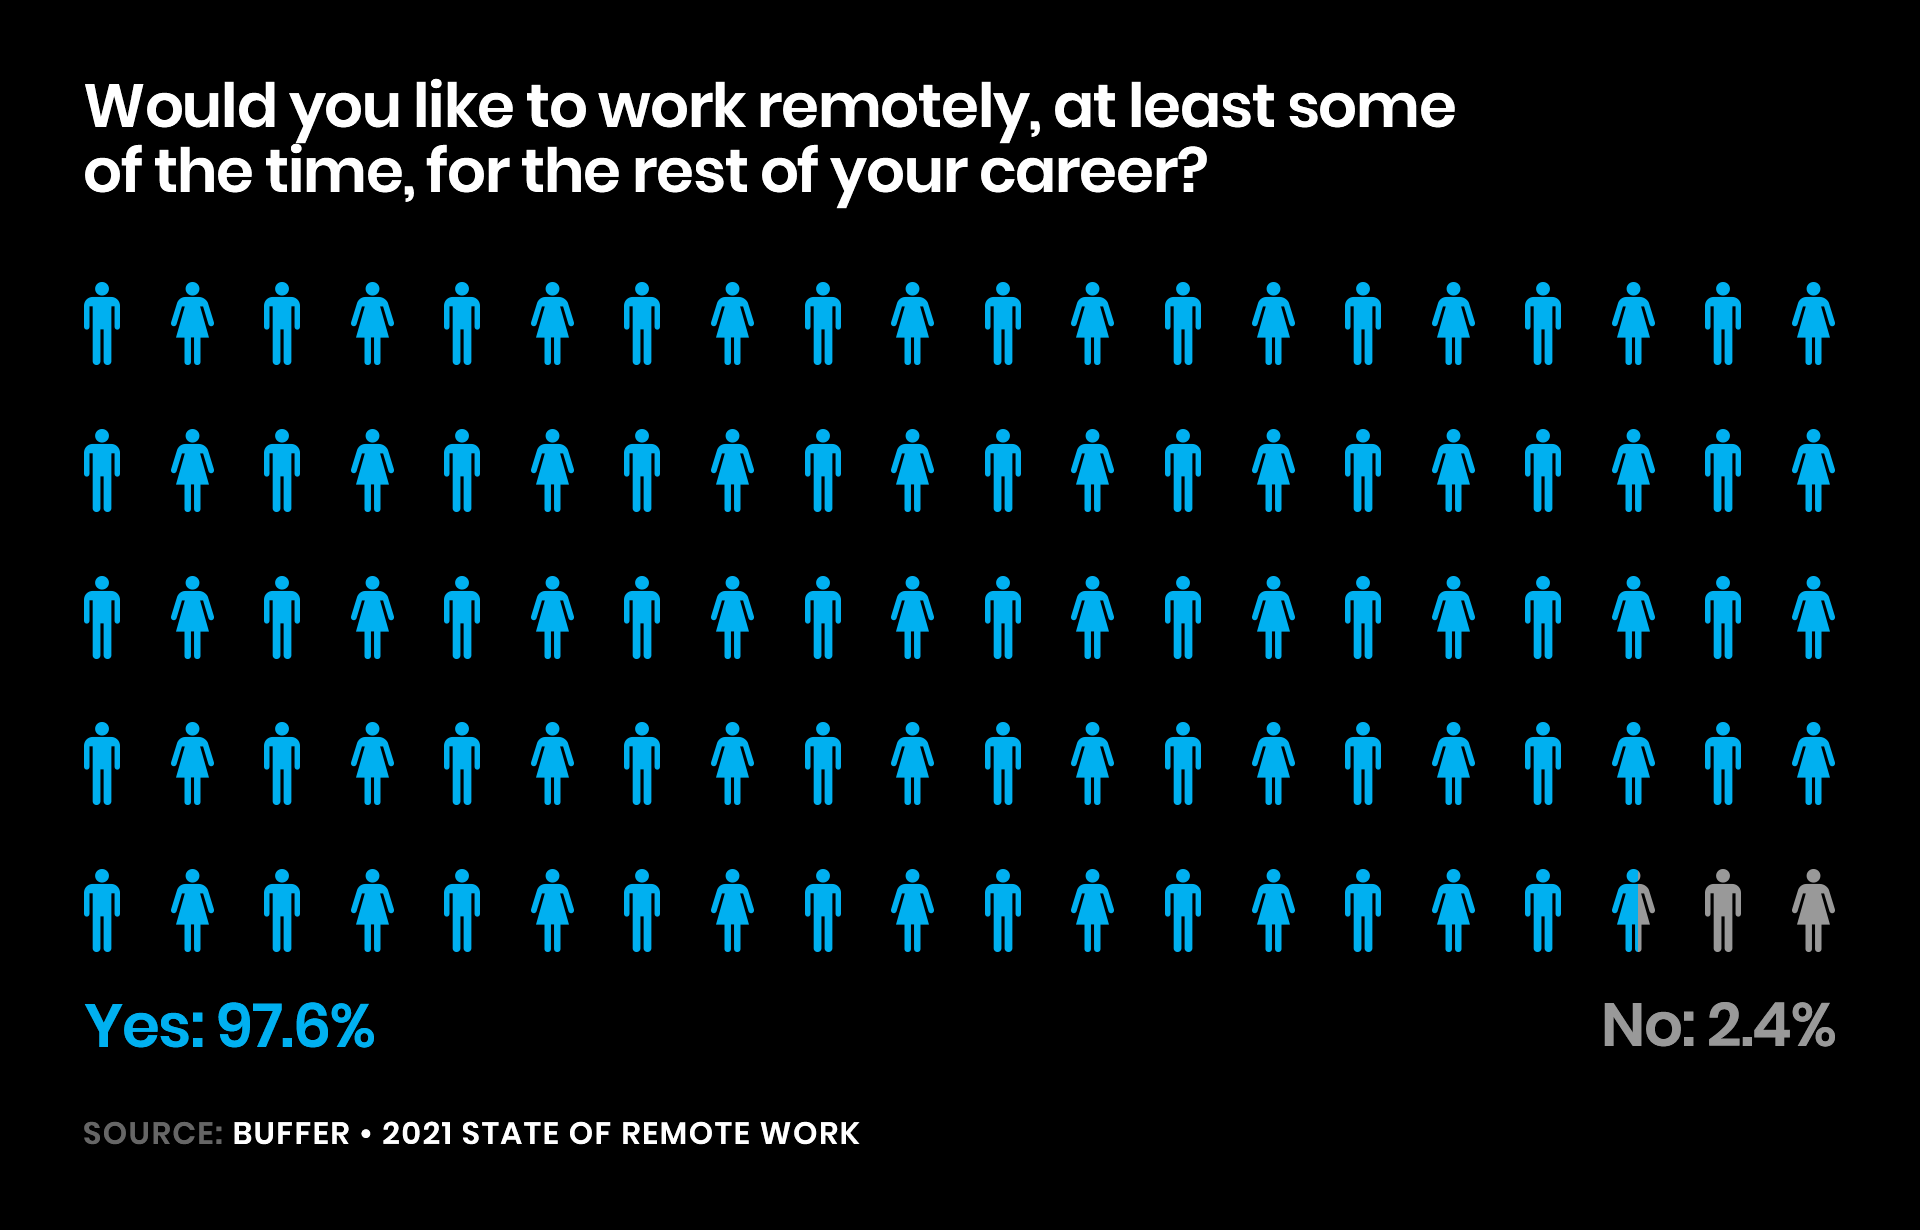 Illustrated statistic from Buffer showing 97.6% of people would like to remotely (at least some of the time) for the rest of their career.